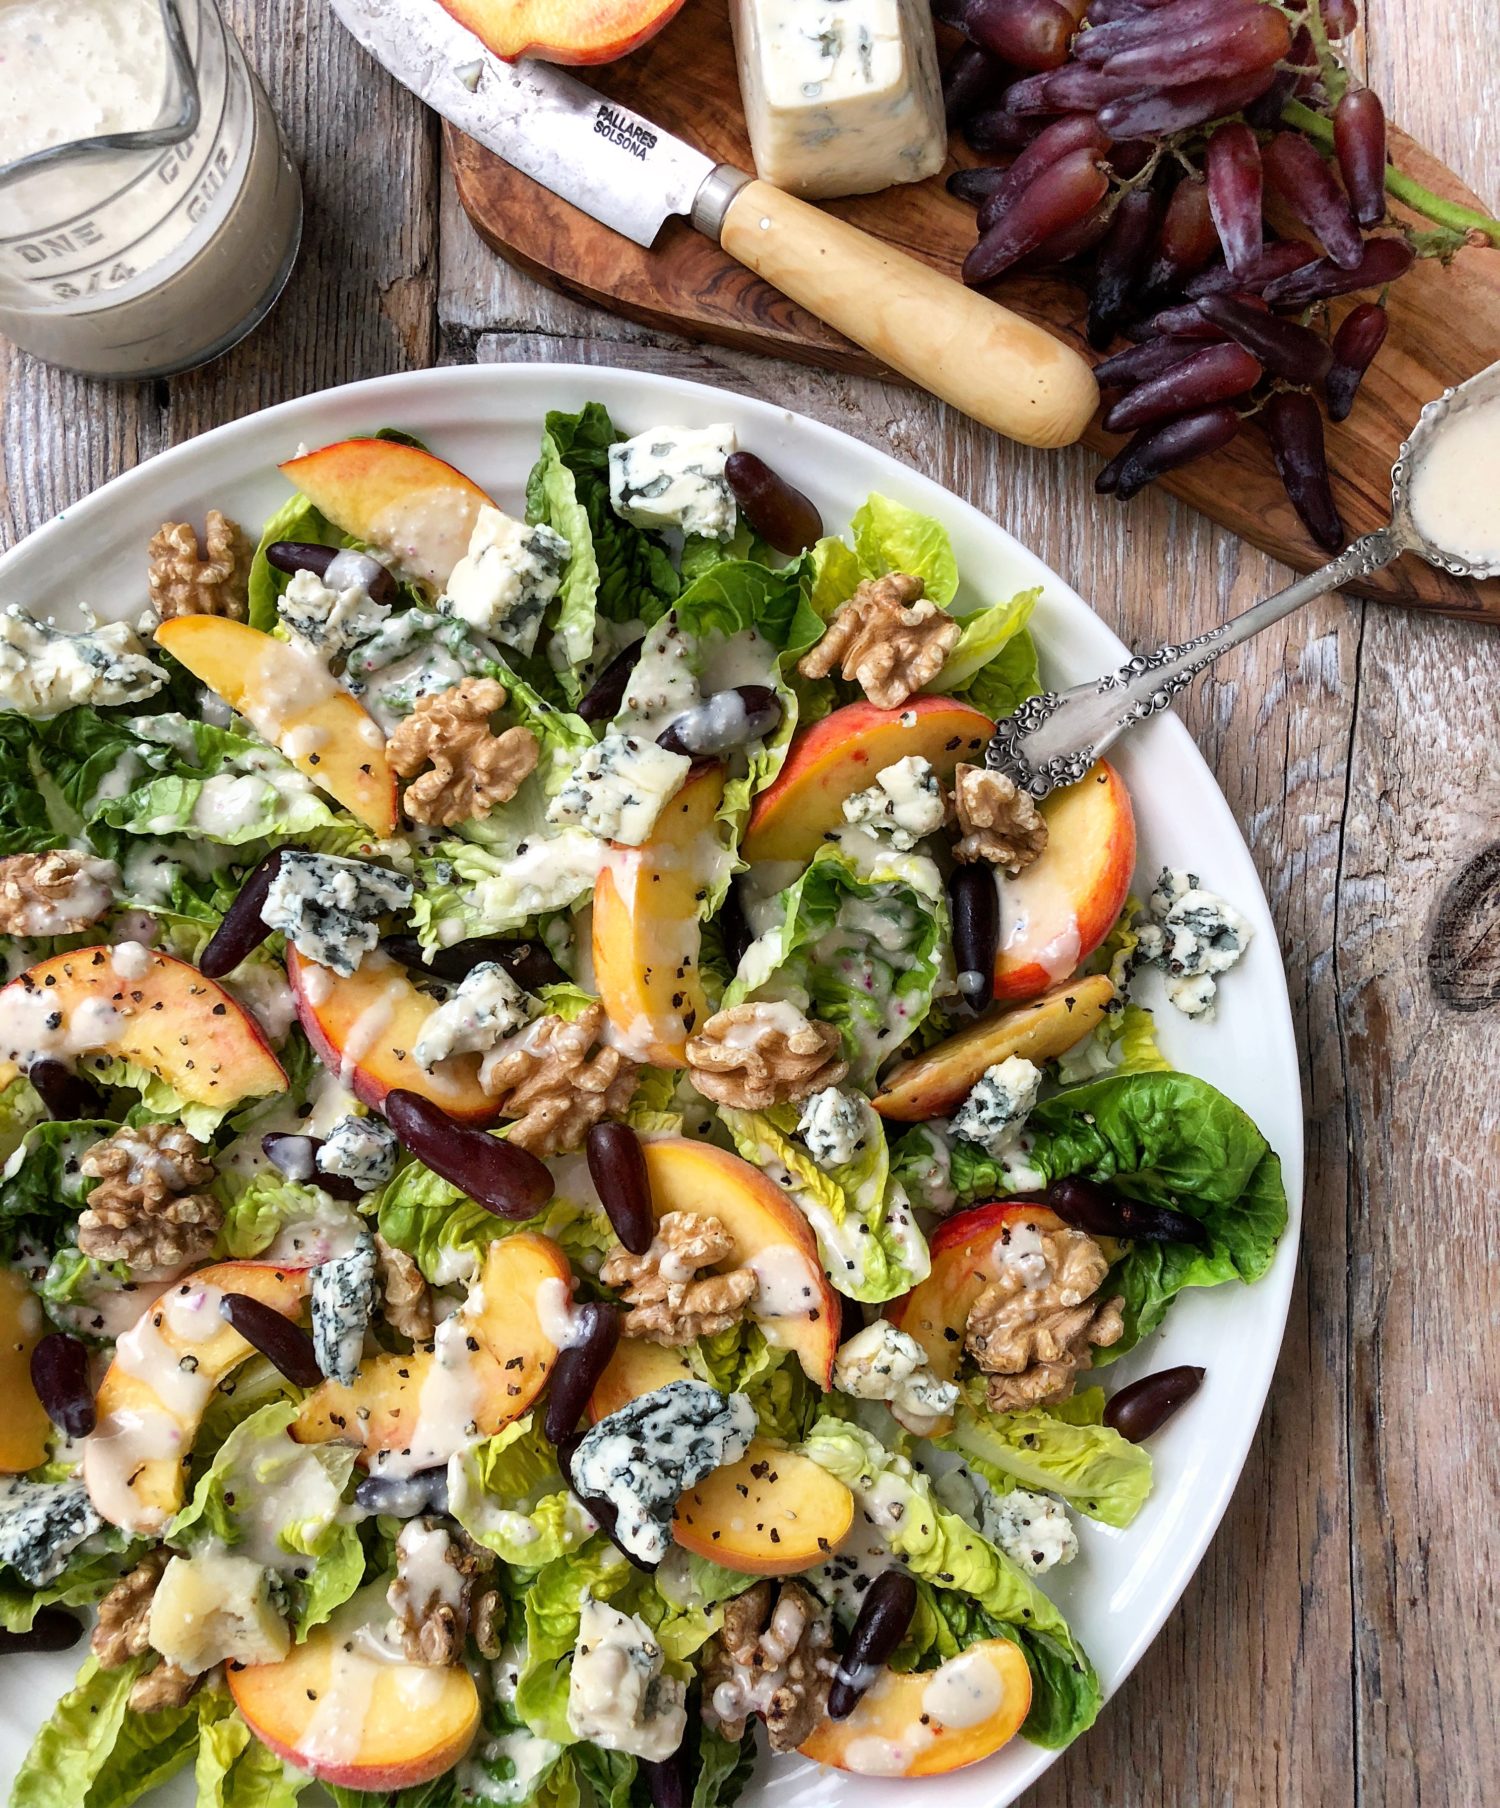 Peach and Little Gems Salad, with Grapes, Walnuts and Blue Cheese Dressing